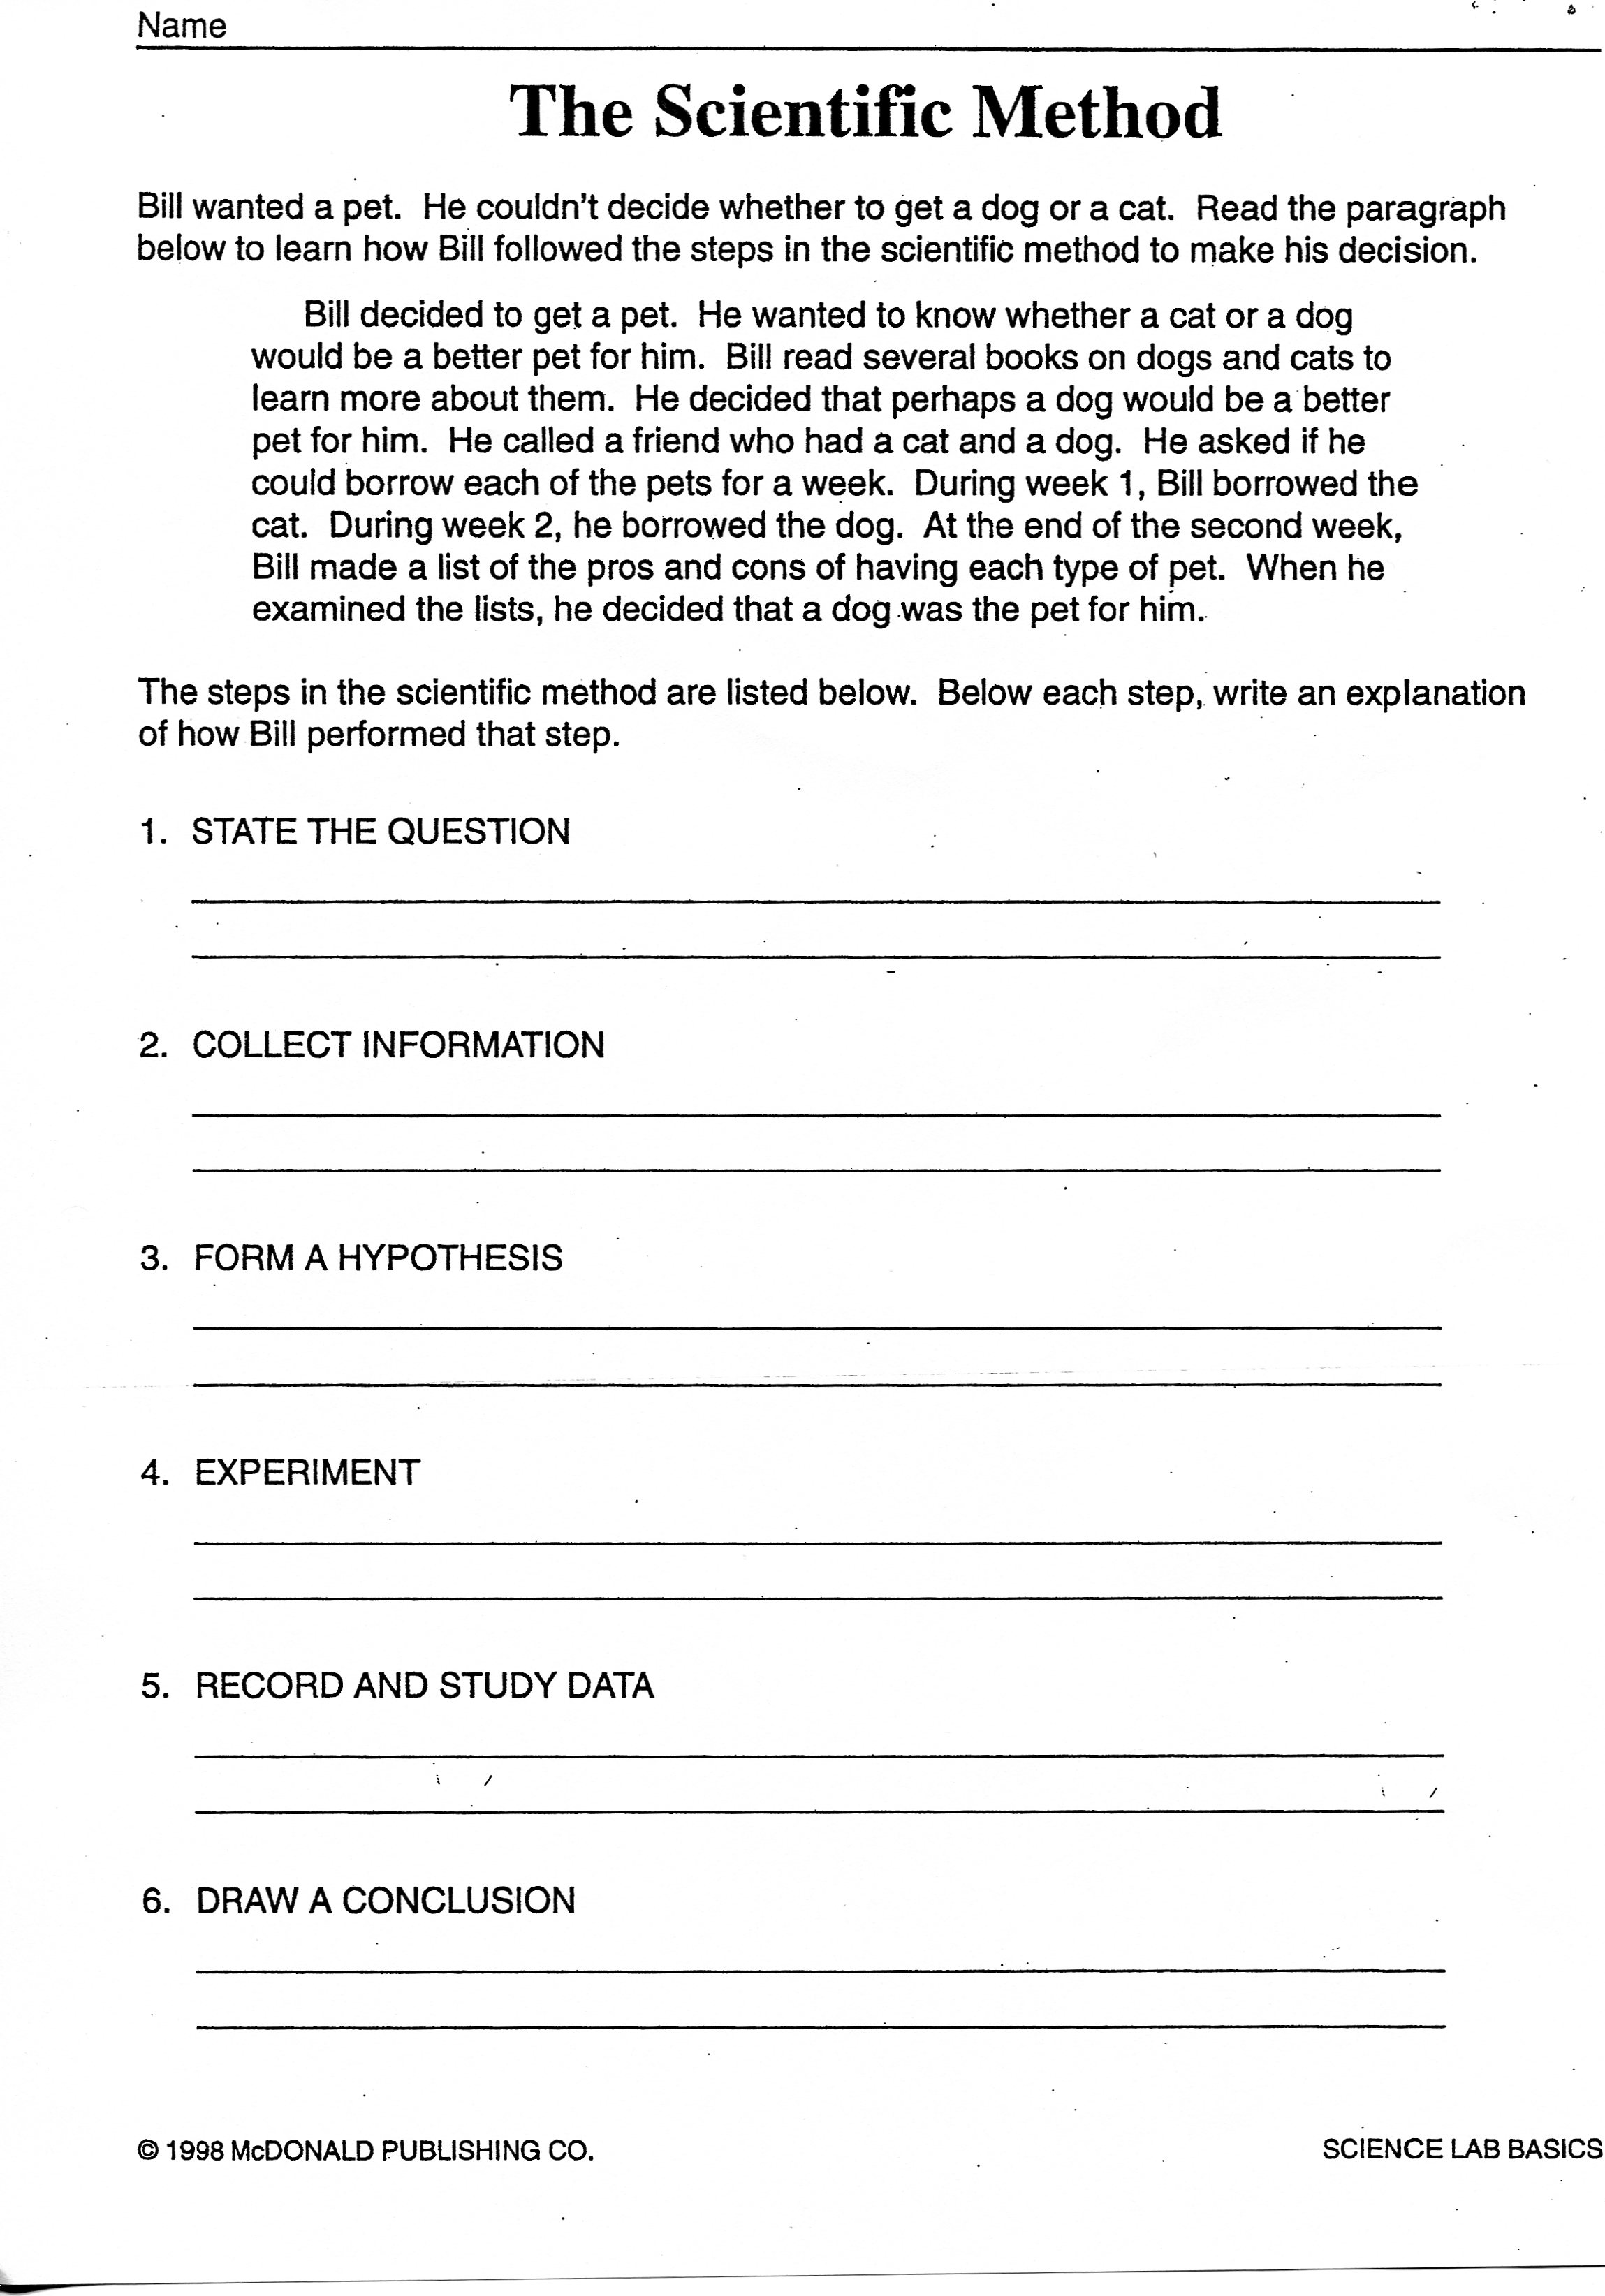 11 Best Images of Scientific Method Worksheets For 6th